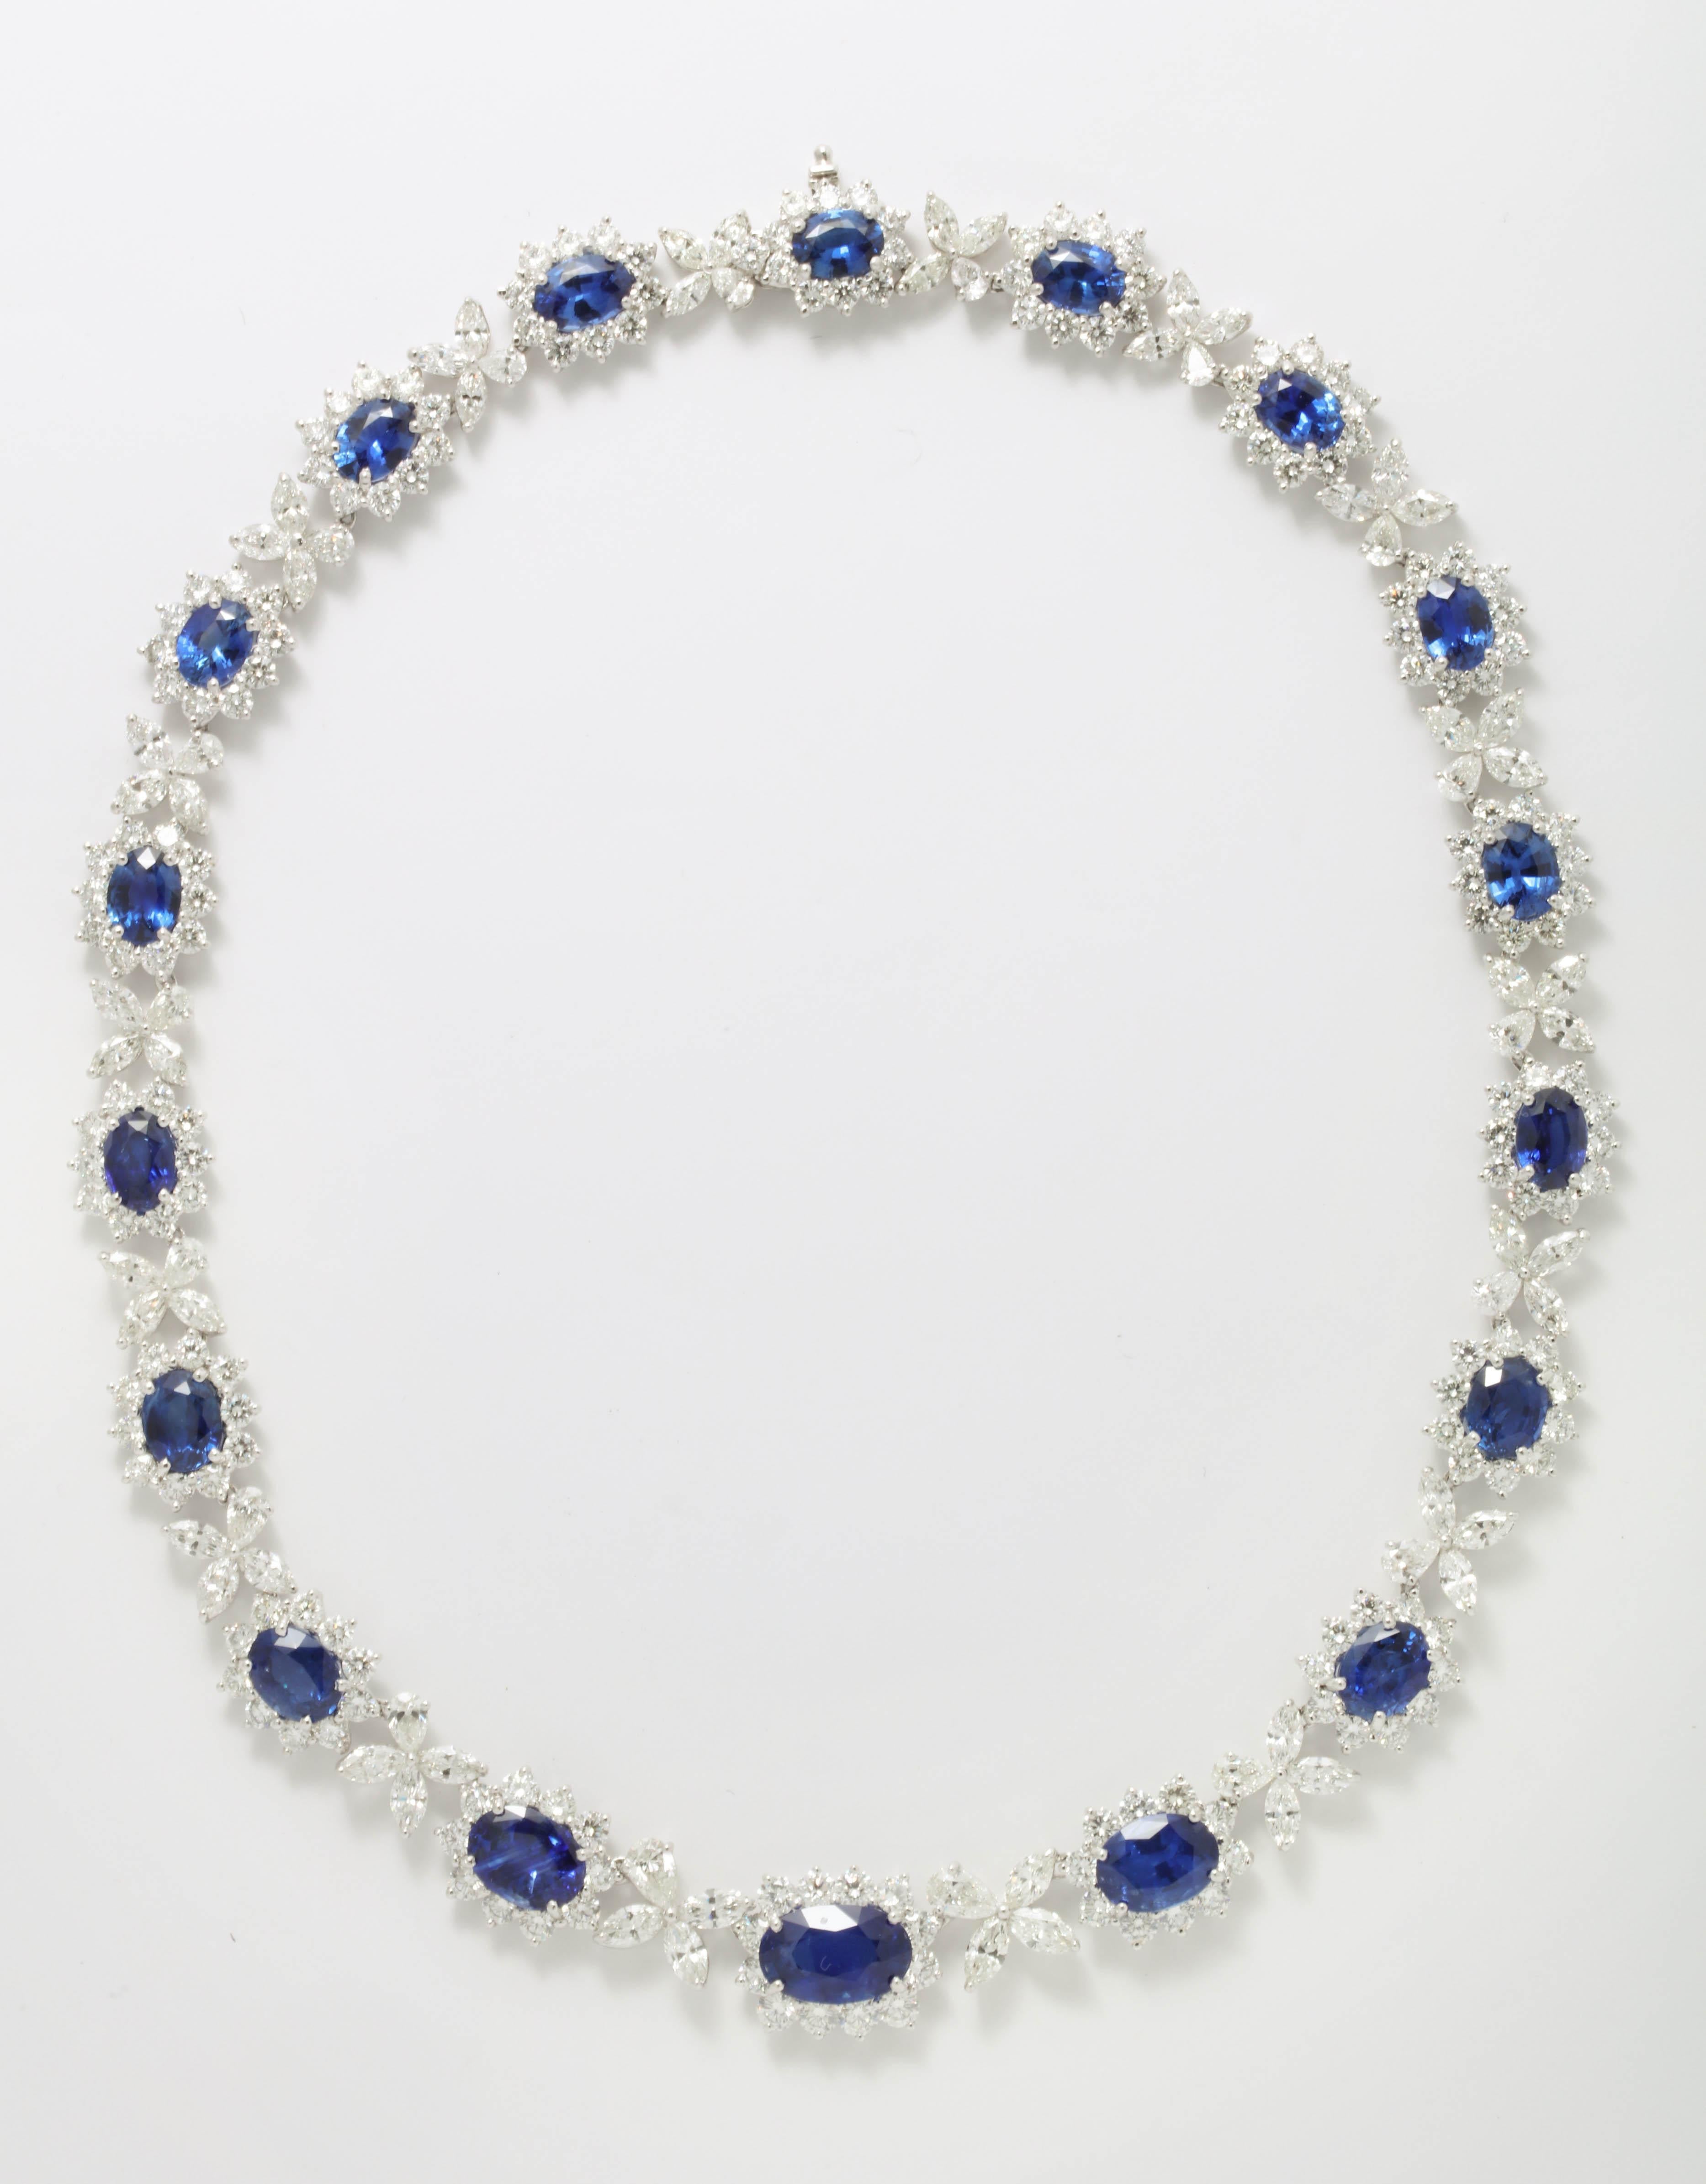 
An exquisite piece! 

43.11 carats of fine blue sapphires

37.86 carats of white round, pear and marquise cut diamonds 

Set in platinum 

This design and quality can only be found in the worlds top jewelry houses. 

16 inch length, but can be